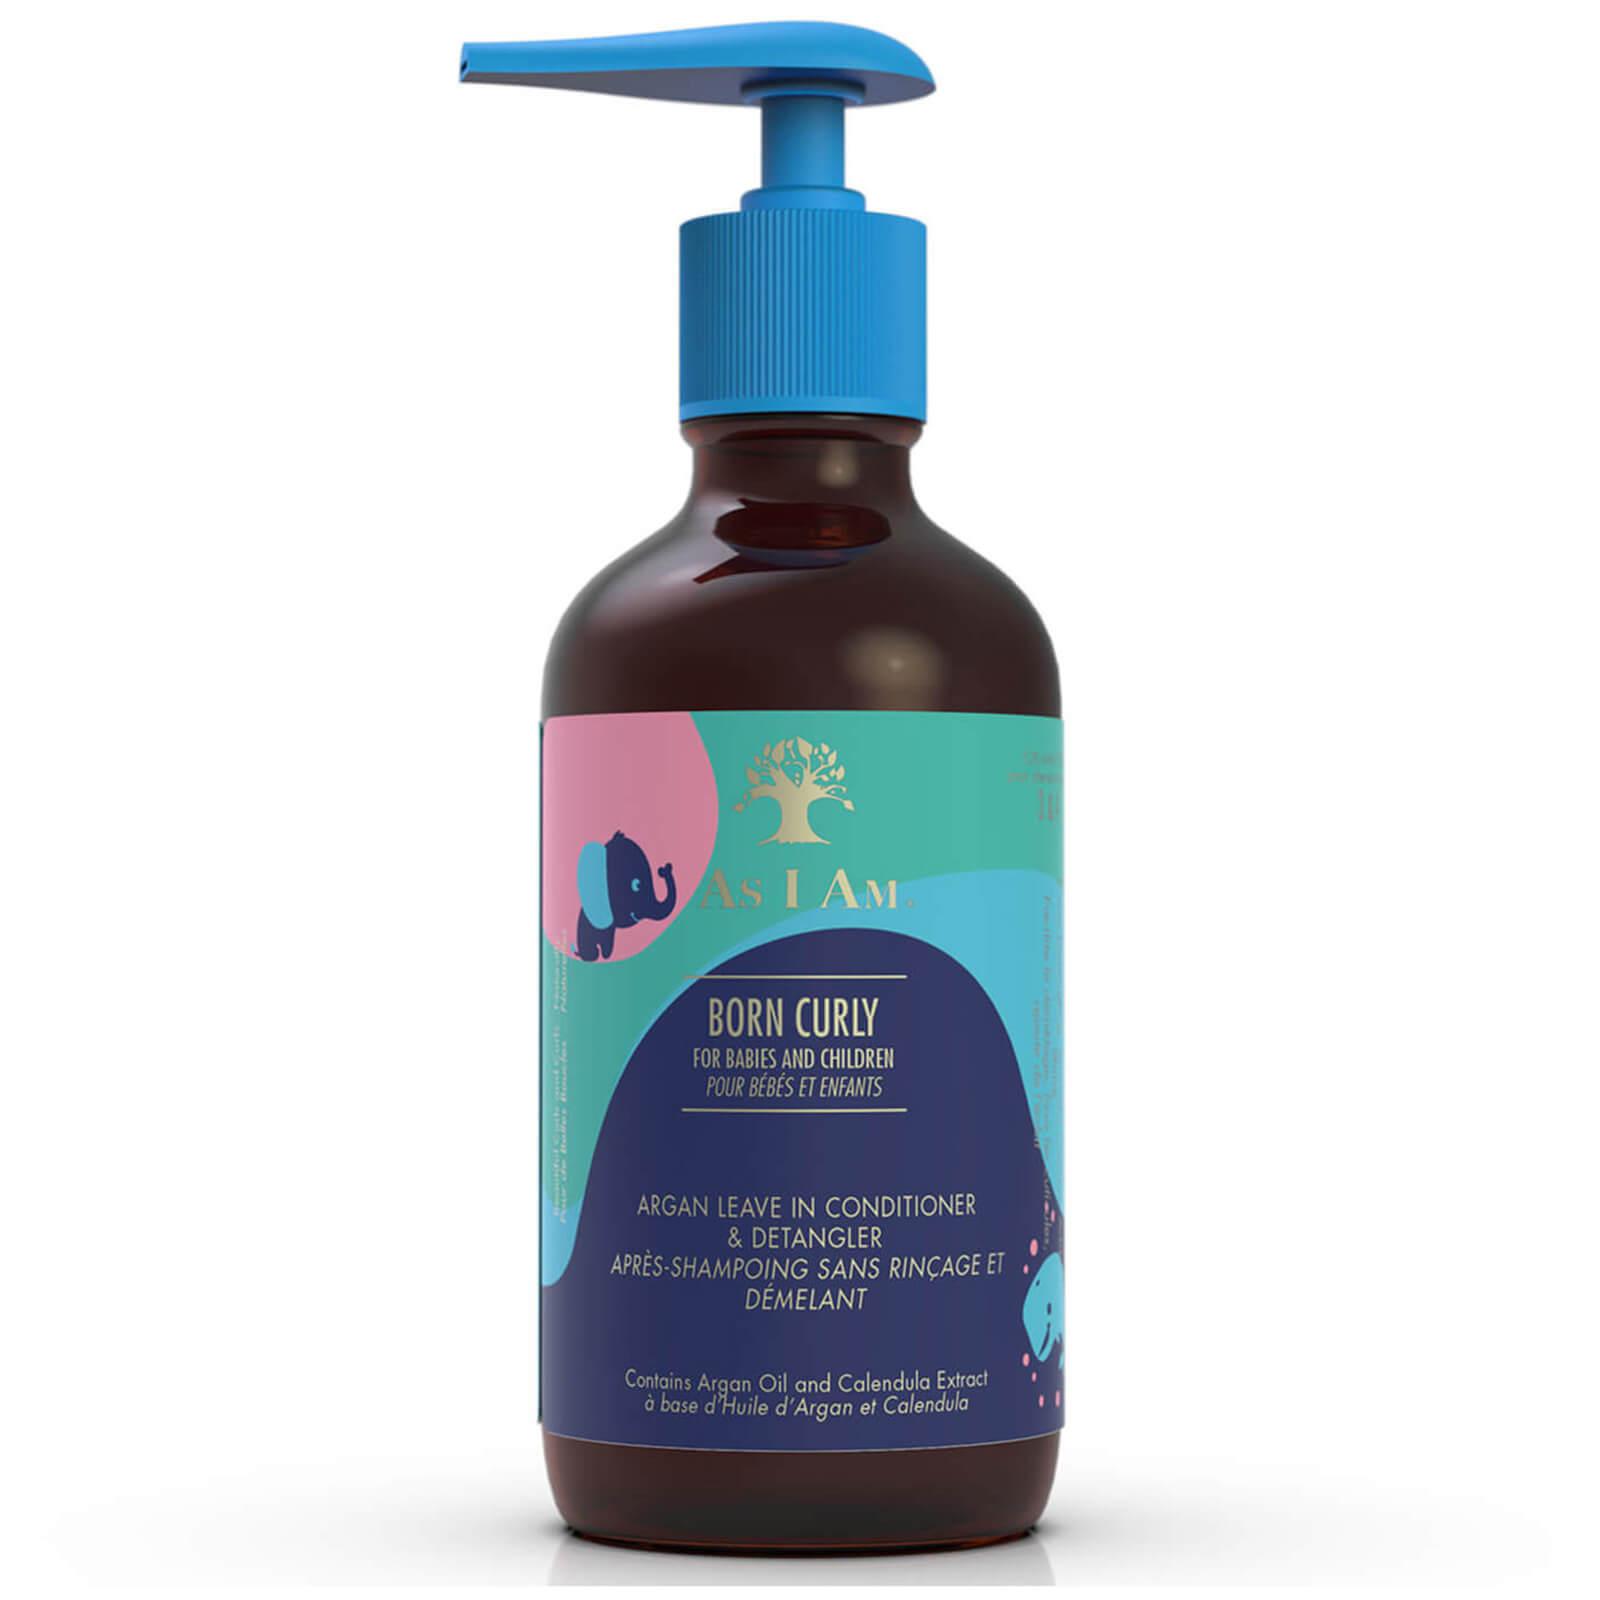 Image of As I Am Argan Born Curly Leave-in Conditioner and Detangler 240ml